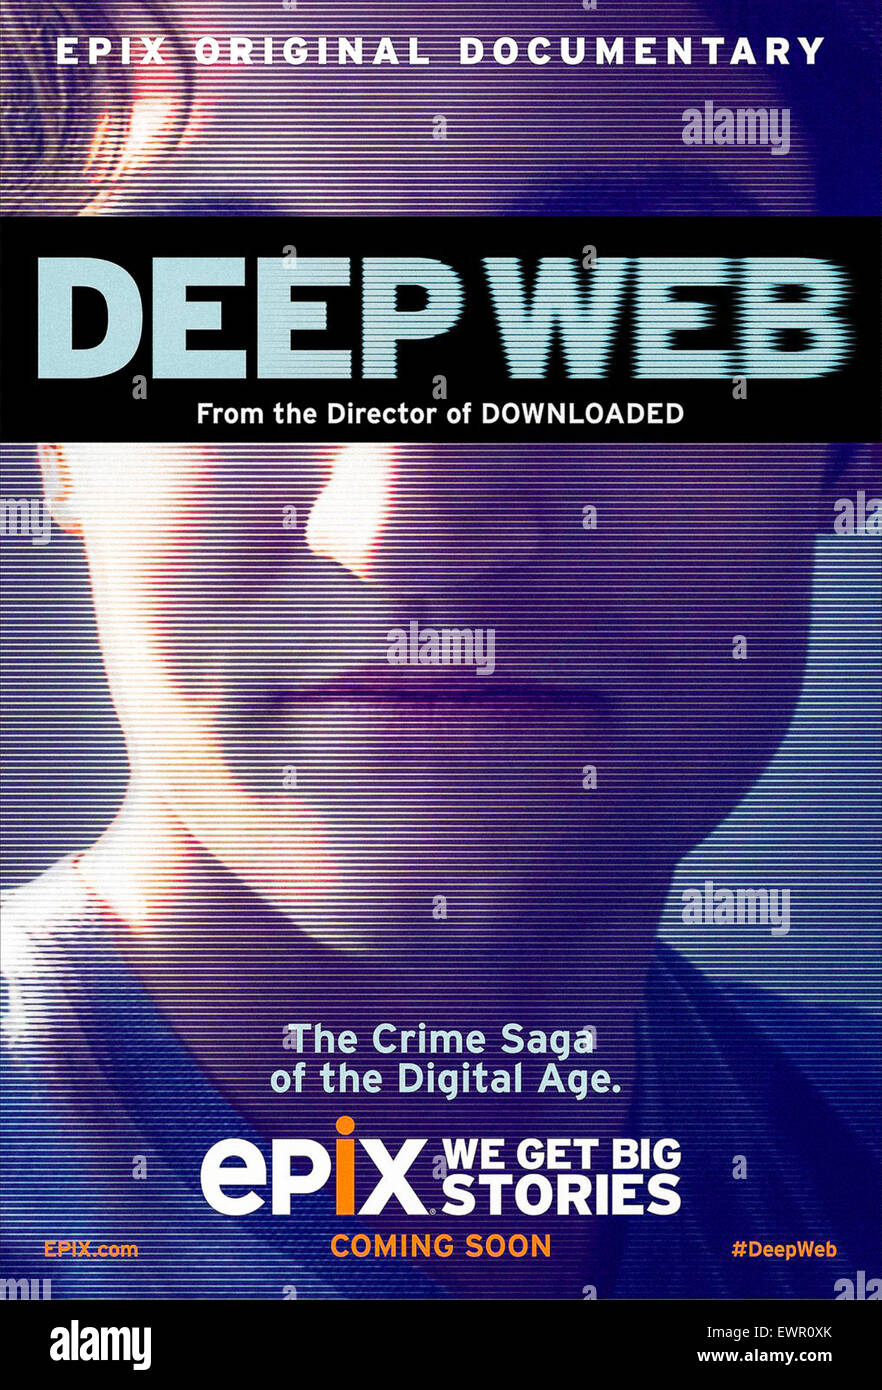 Poster for 'Deep Web' a documentary film about the illicit Silk Road marketplace for drugs and its curious libertarian community accessed anonymously via the dark web. The film explores the arrest and trial of Ross Ulbricht featuring interviews with hackers, cryptographers and law enforcement agents  Directed by Alex Winter, narrated by Keanu Reeve and released in 2015. Stock Photo